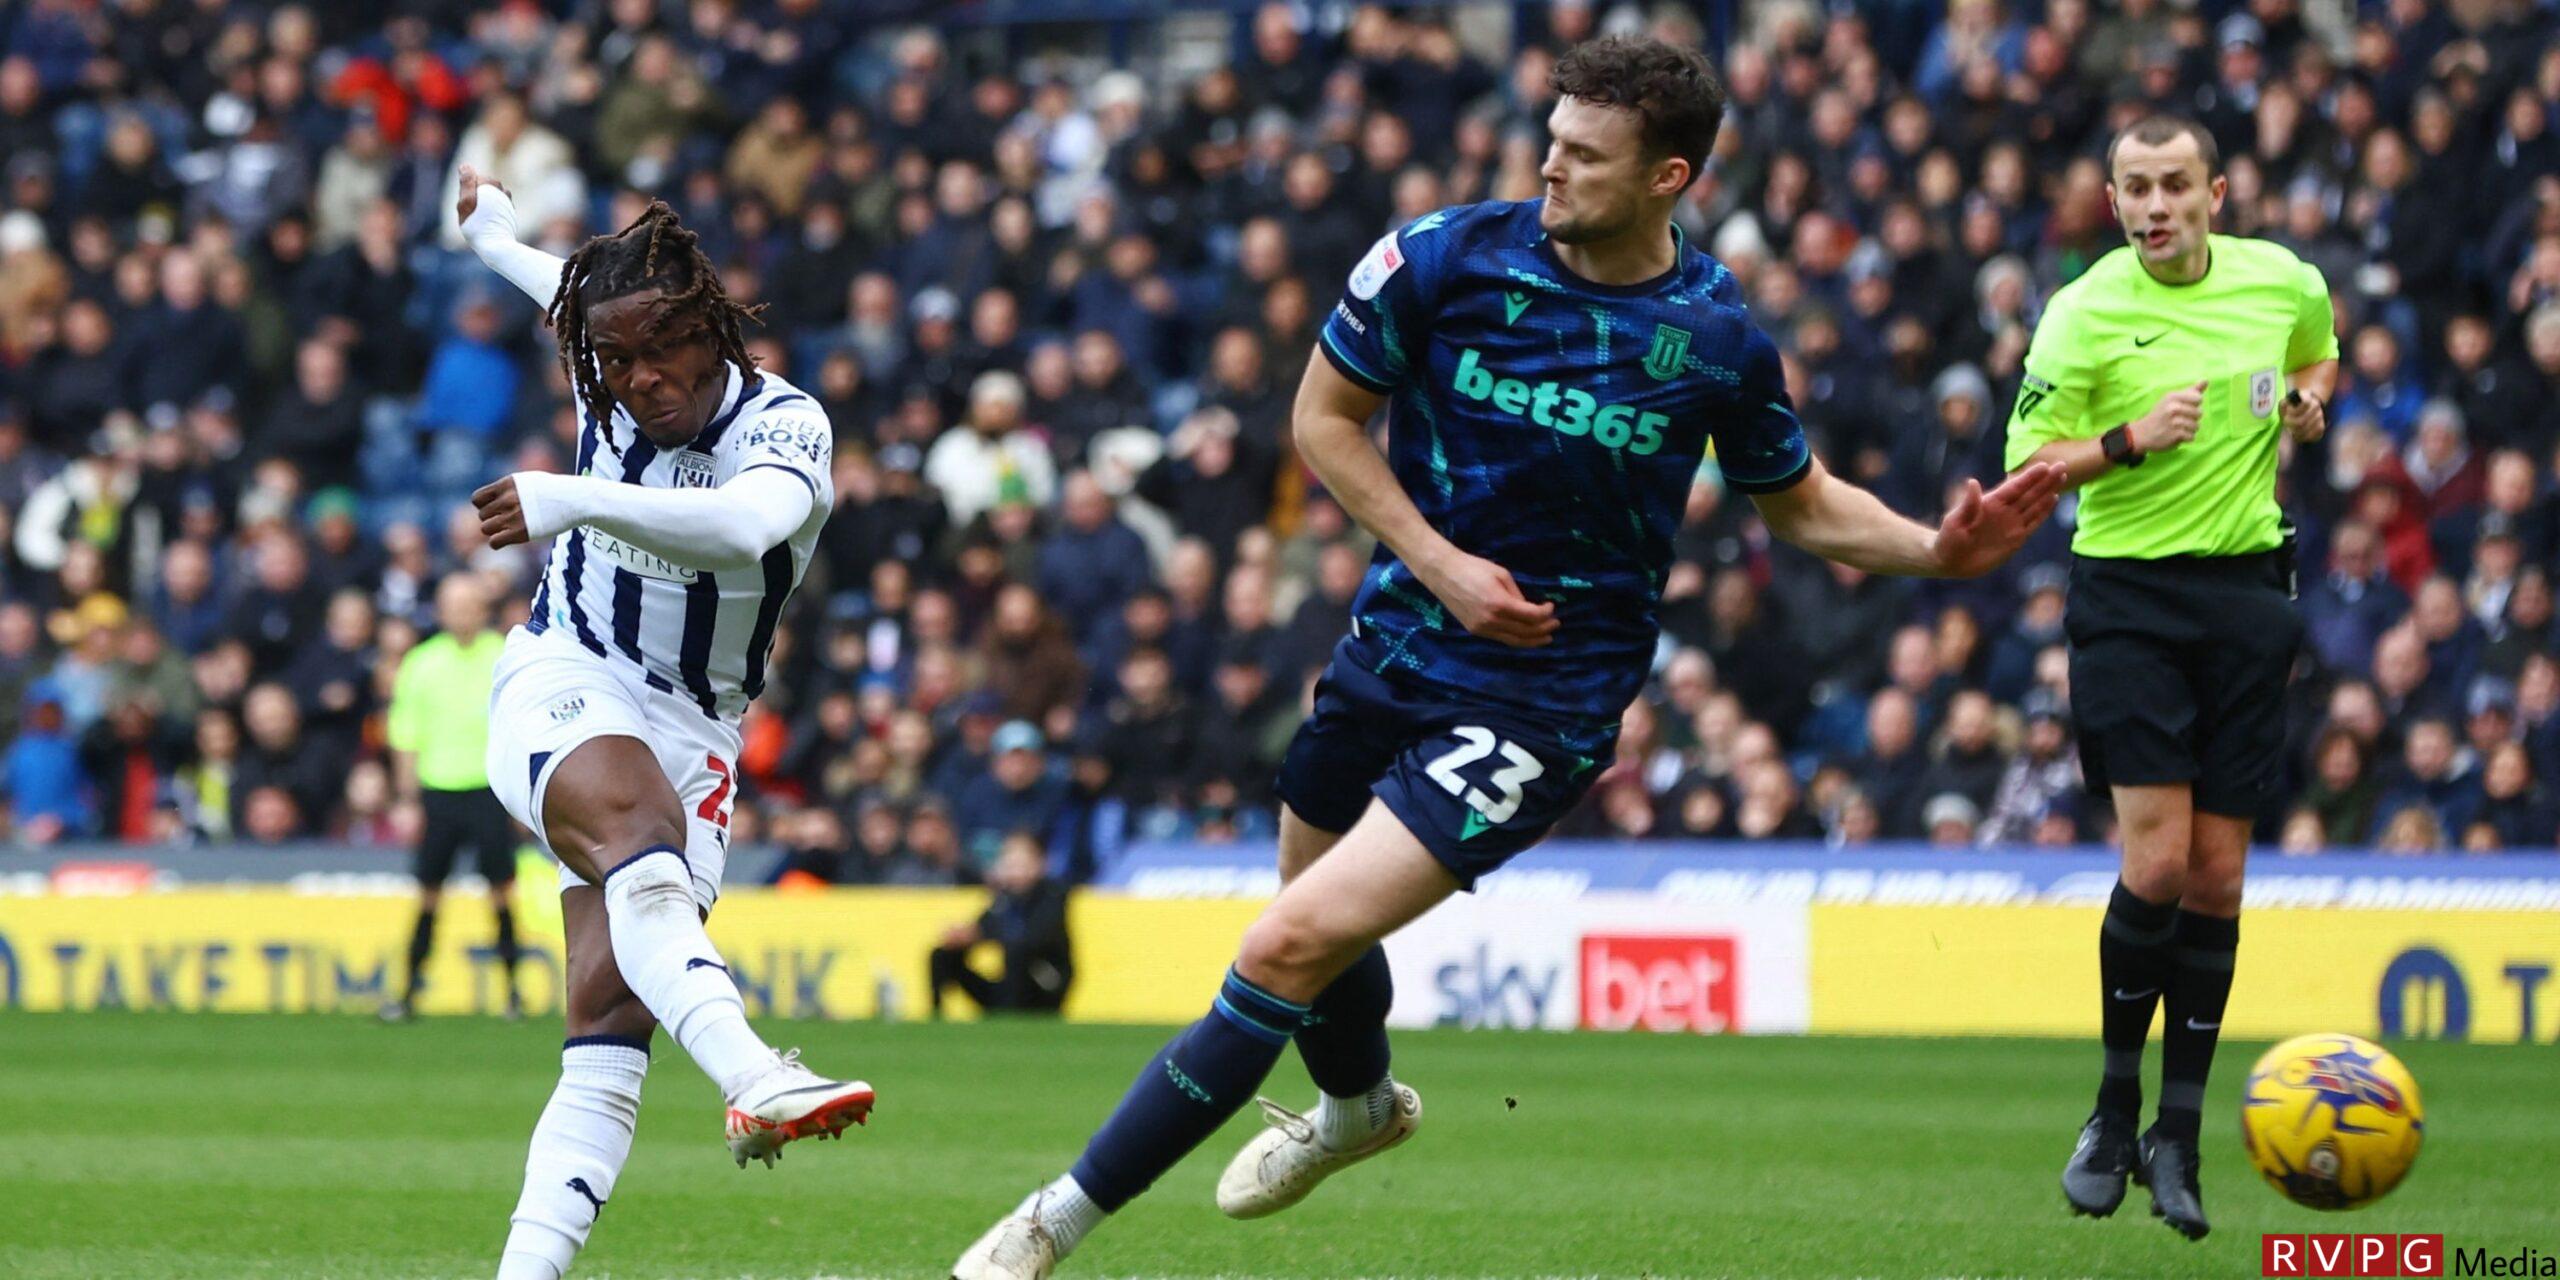 West Brom were washed out by Hawthorn's dud, who deserved more than Thomas-Asante